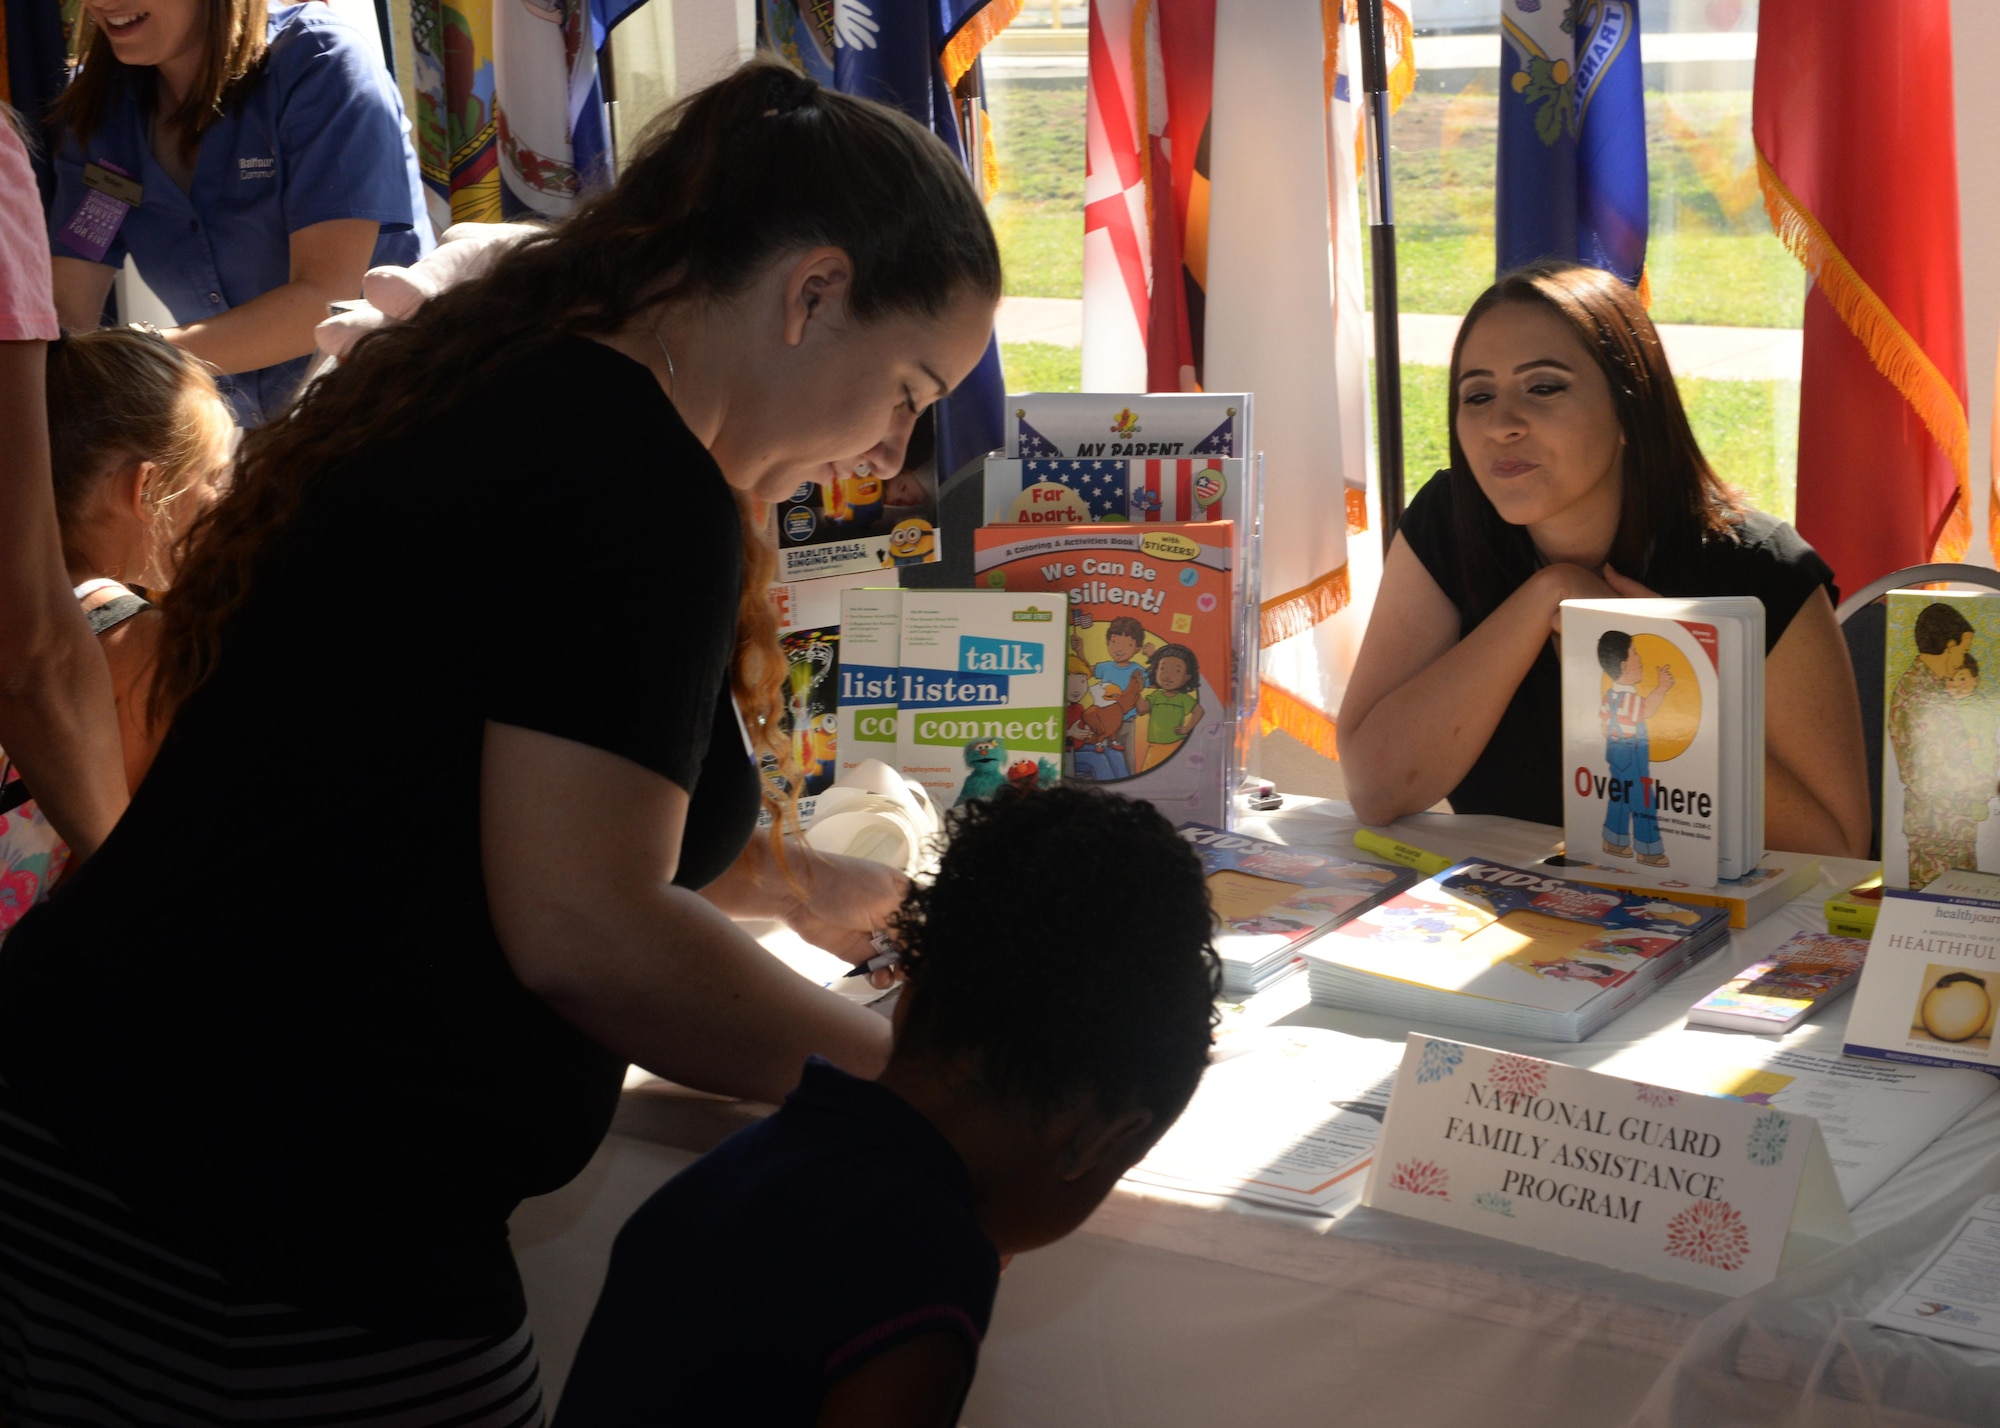 A participant at Beale’s Baby Shower reads information offered from the National Guard Family Assistance Program Aug. 13, 2016, at Beale Air Force Base, California. The event provided Team Beale’s new and expecting families the opportunity to build relationships with others, participate in baby shower activities and get information from approximately 40 agencies on and off base. The agencies provided services and information such as nutrition assistance, healthy living information, child development and parental education. (U.S. Air Force photo by Airman Tristan D. Viglianco)